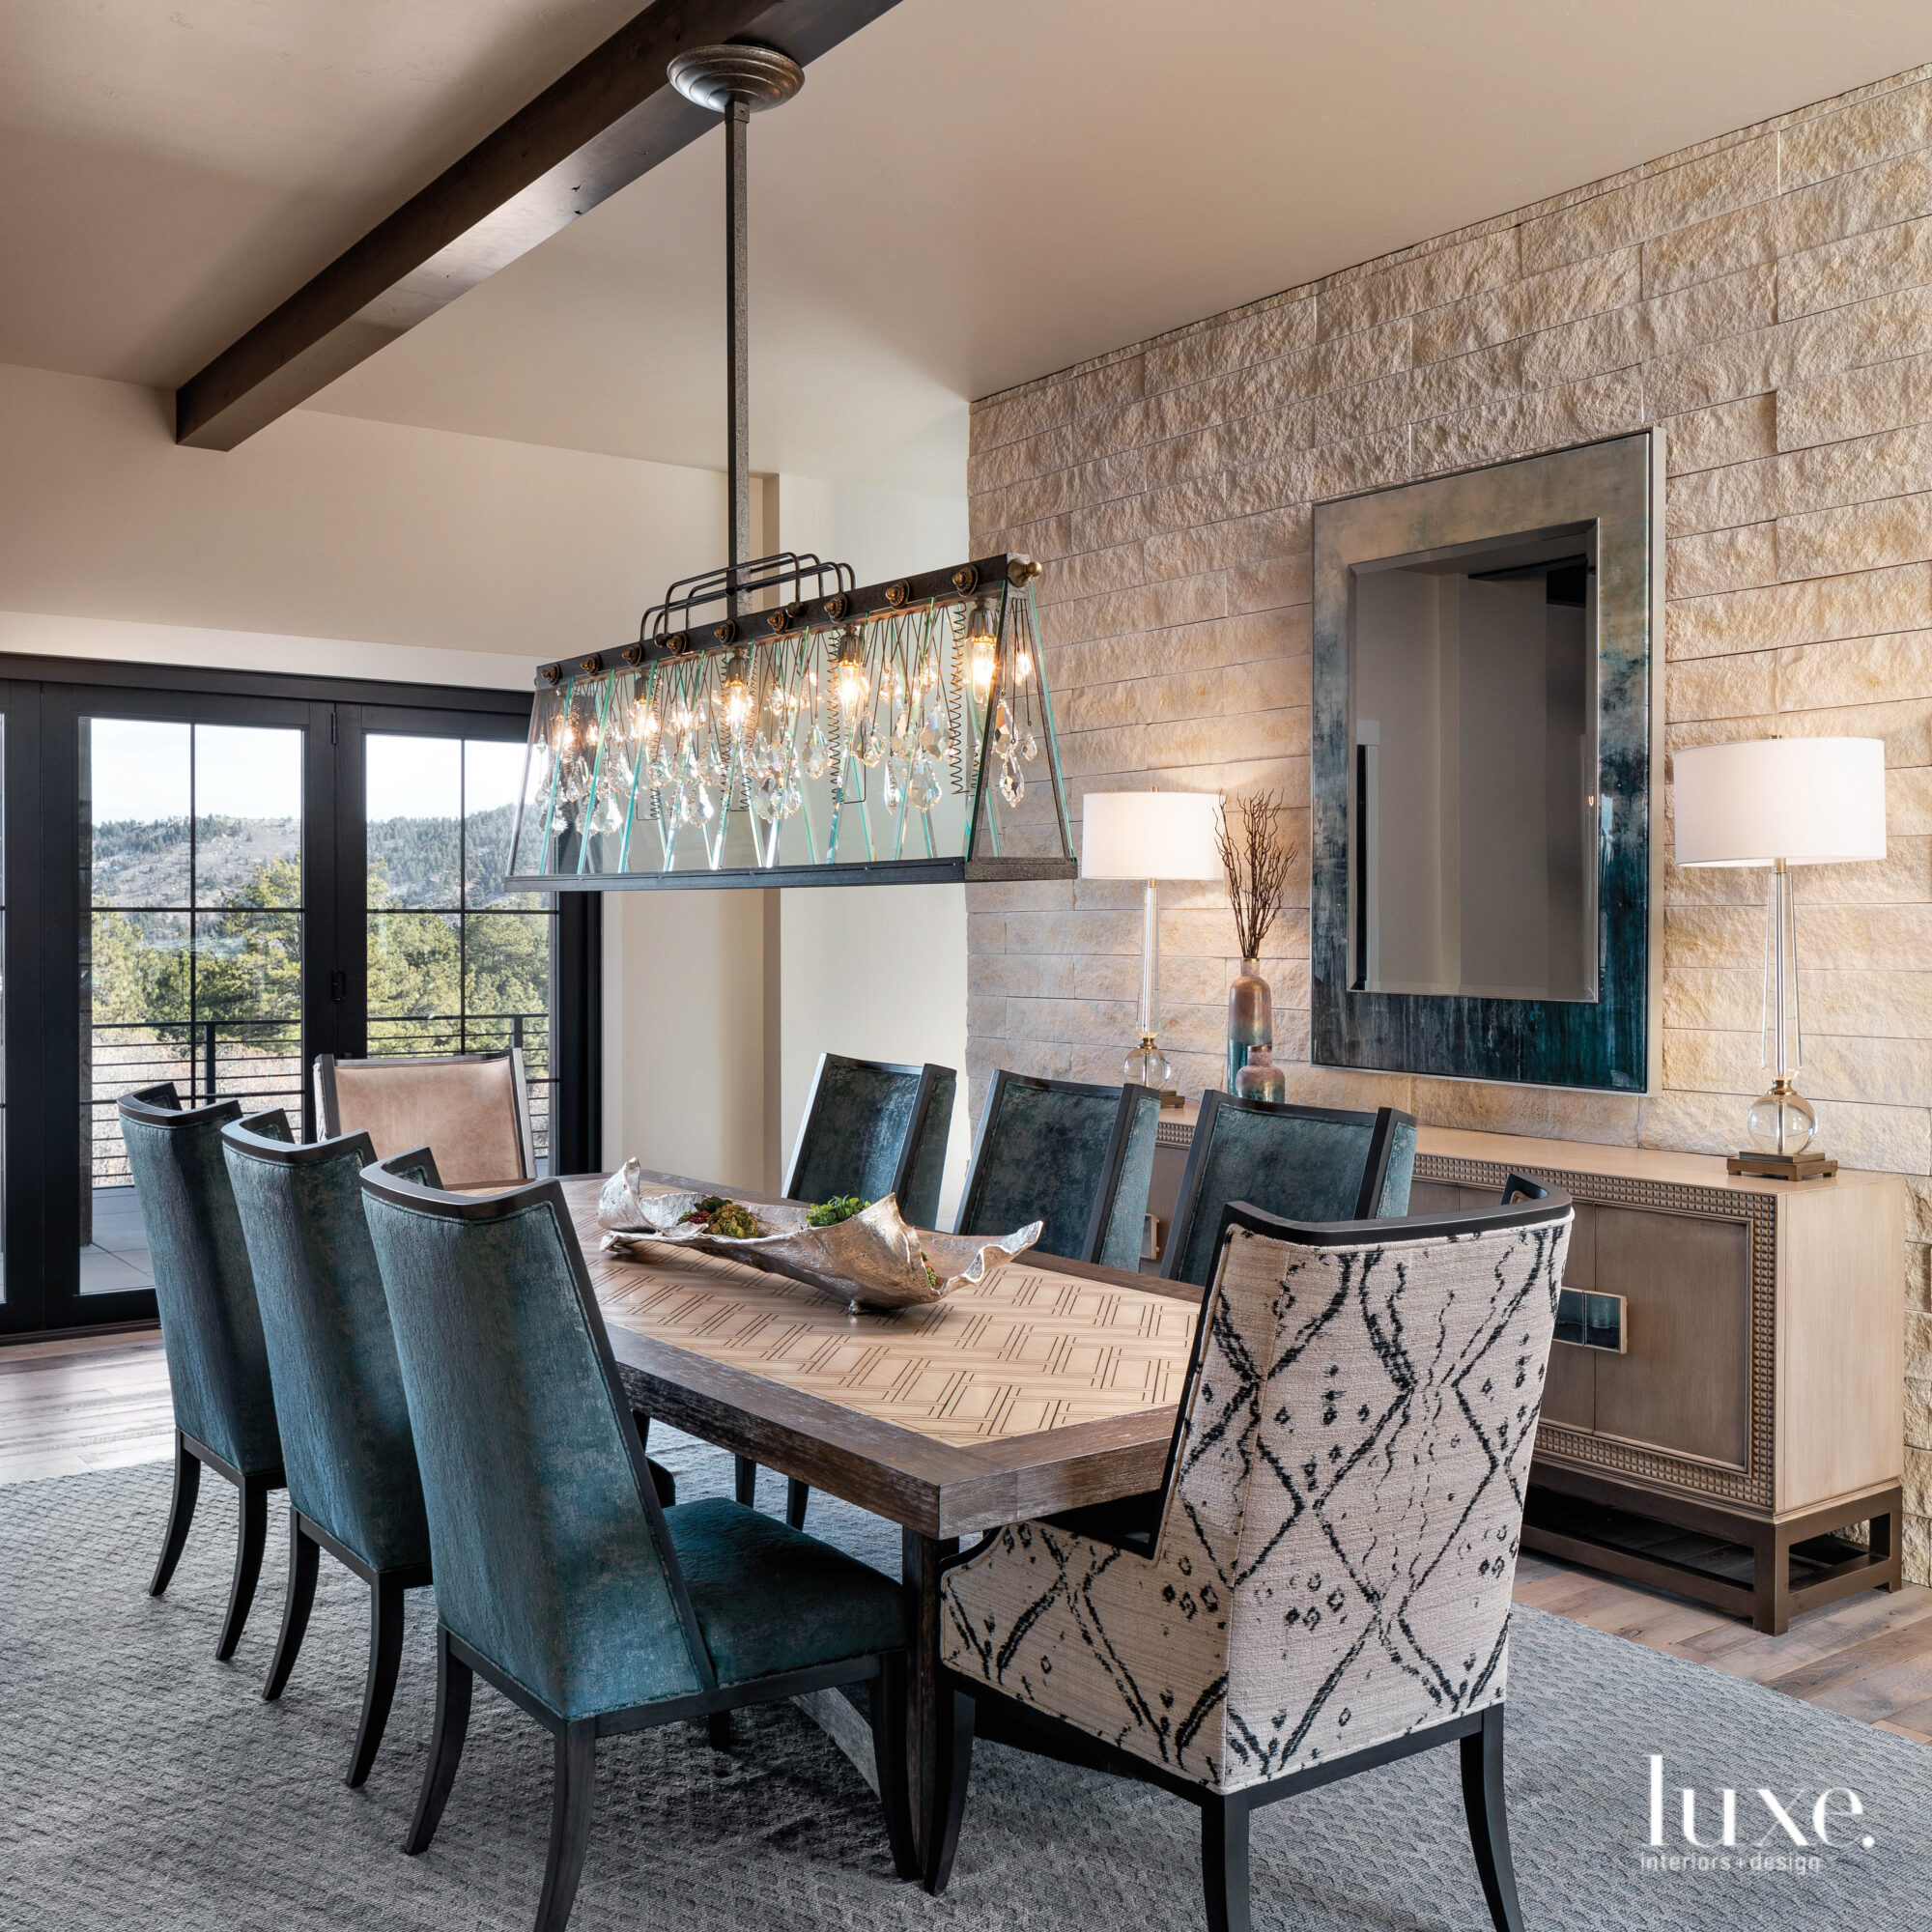 The dining room has a long table and a linear chandelier.